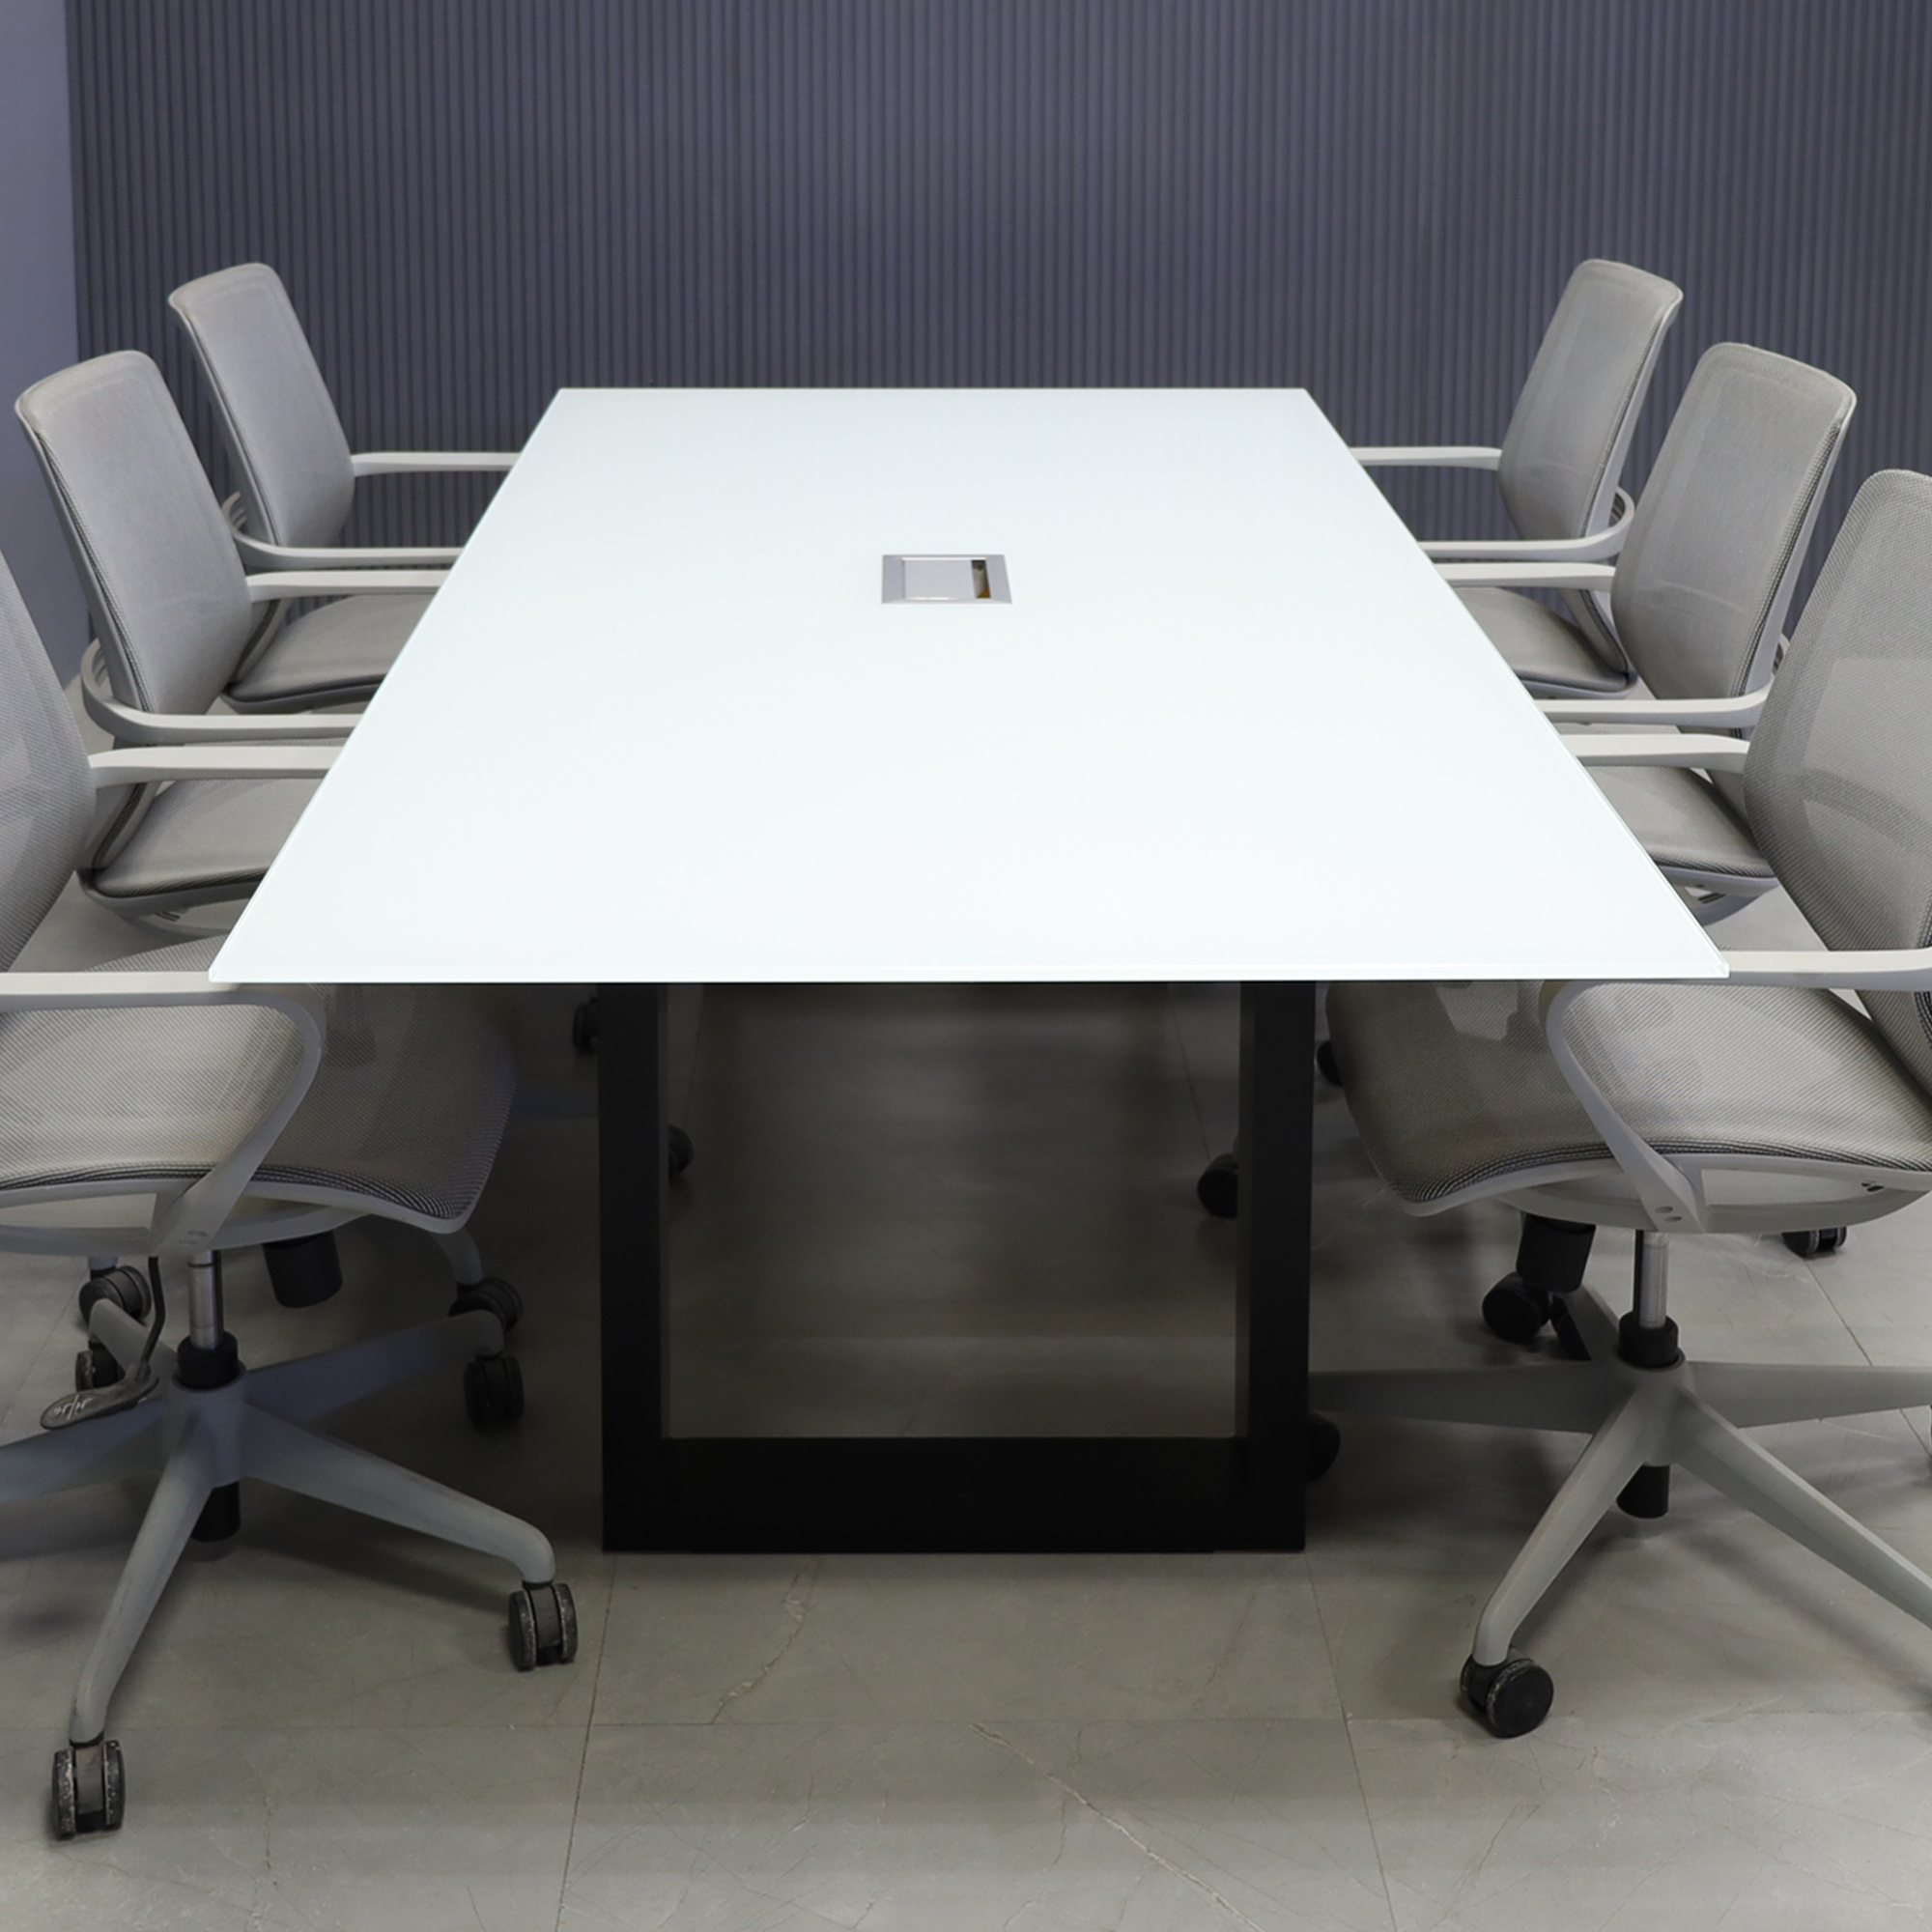 84-inch Omaha Rectangular Conference Table in 1/2